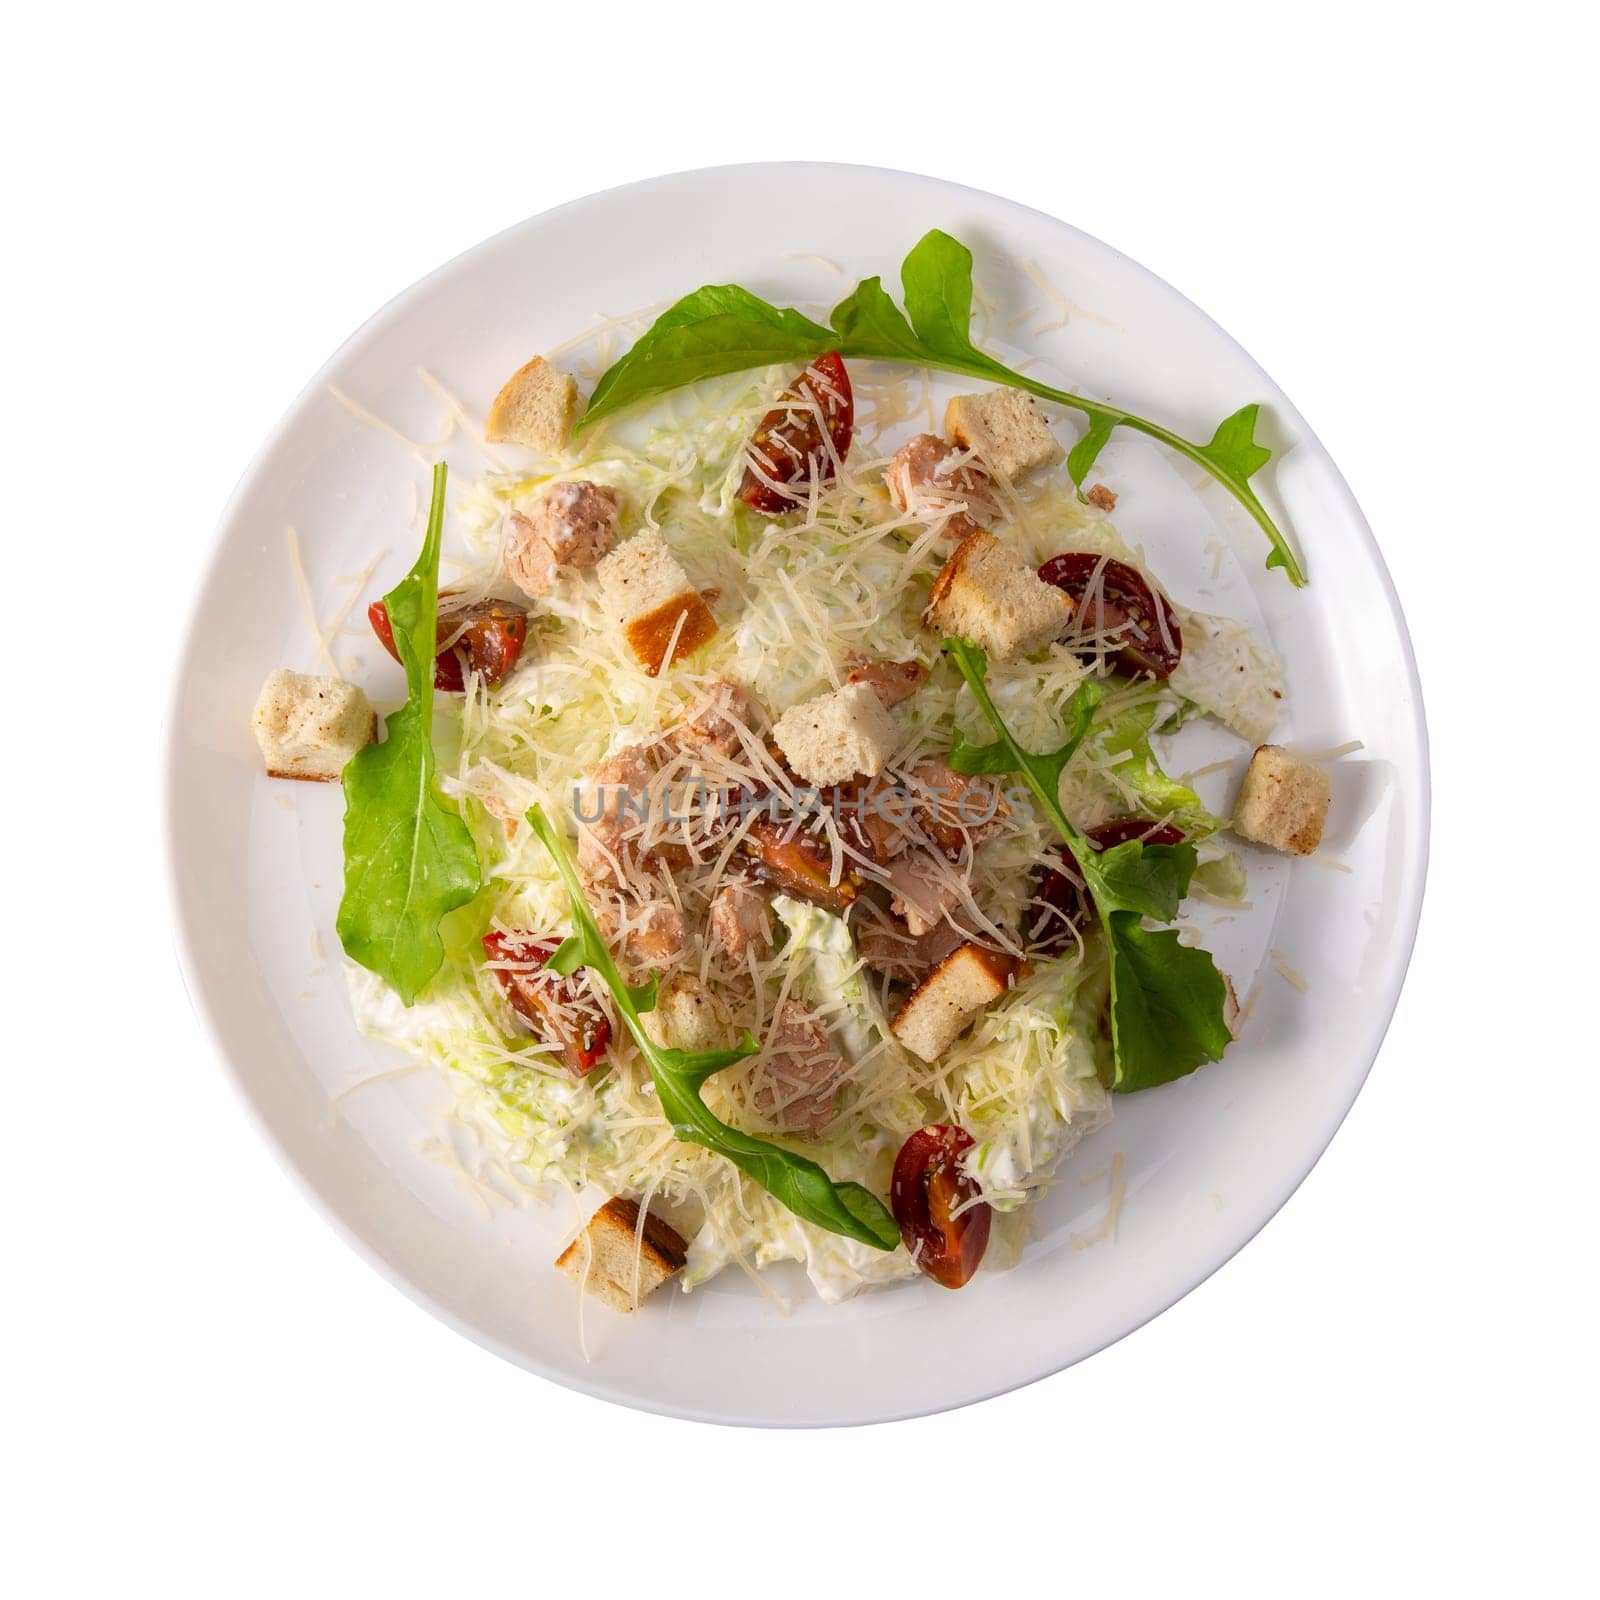 Plate with Traditional Caesar Salad with Chicken and Bacon isolated on White Background. Top view.